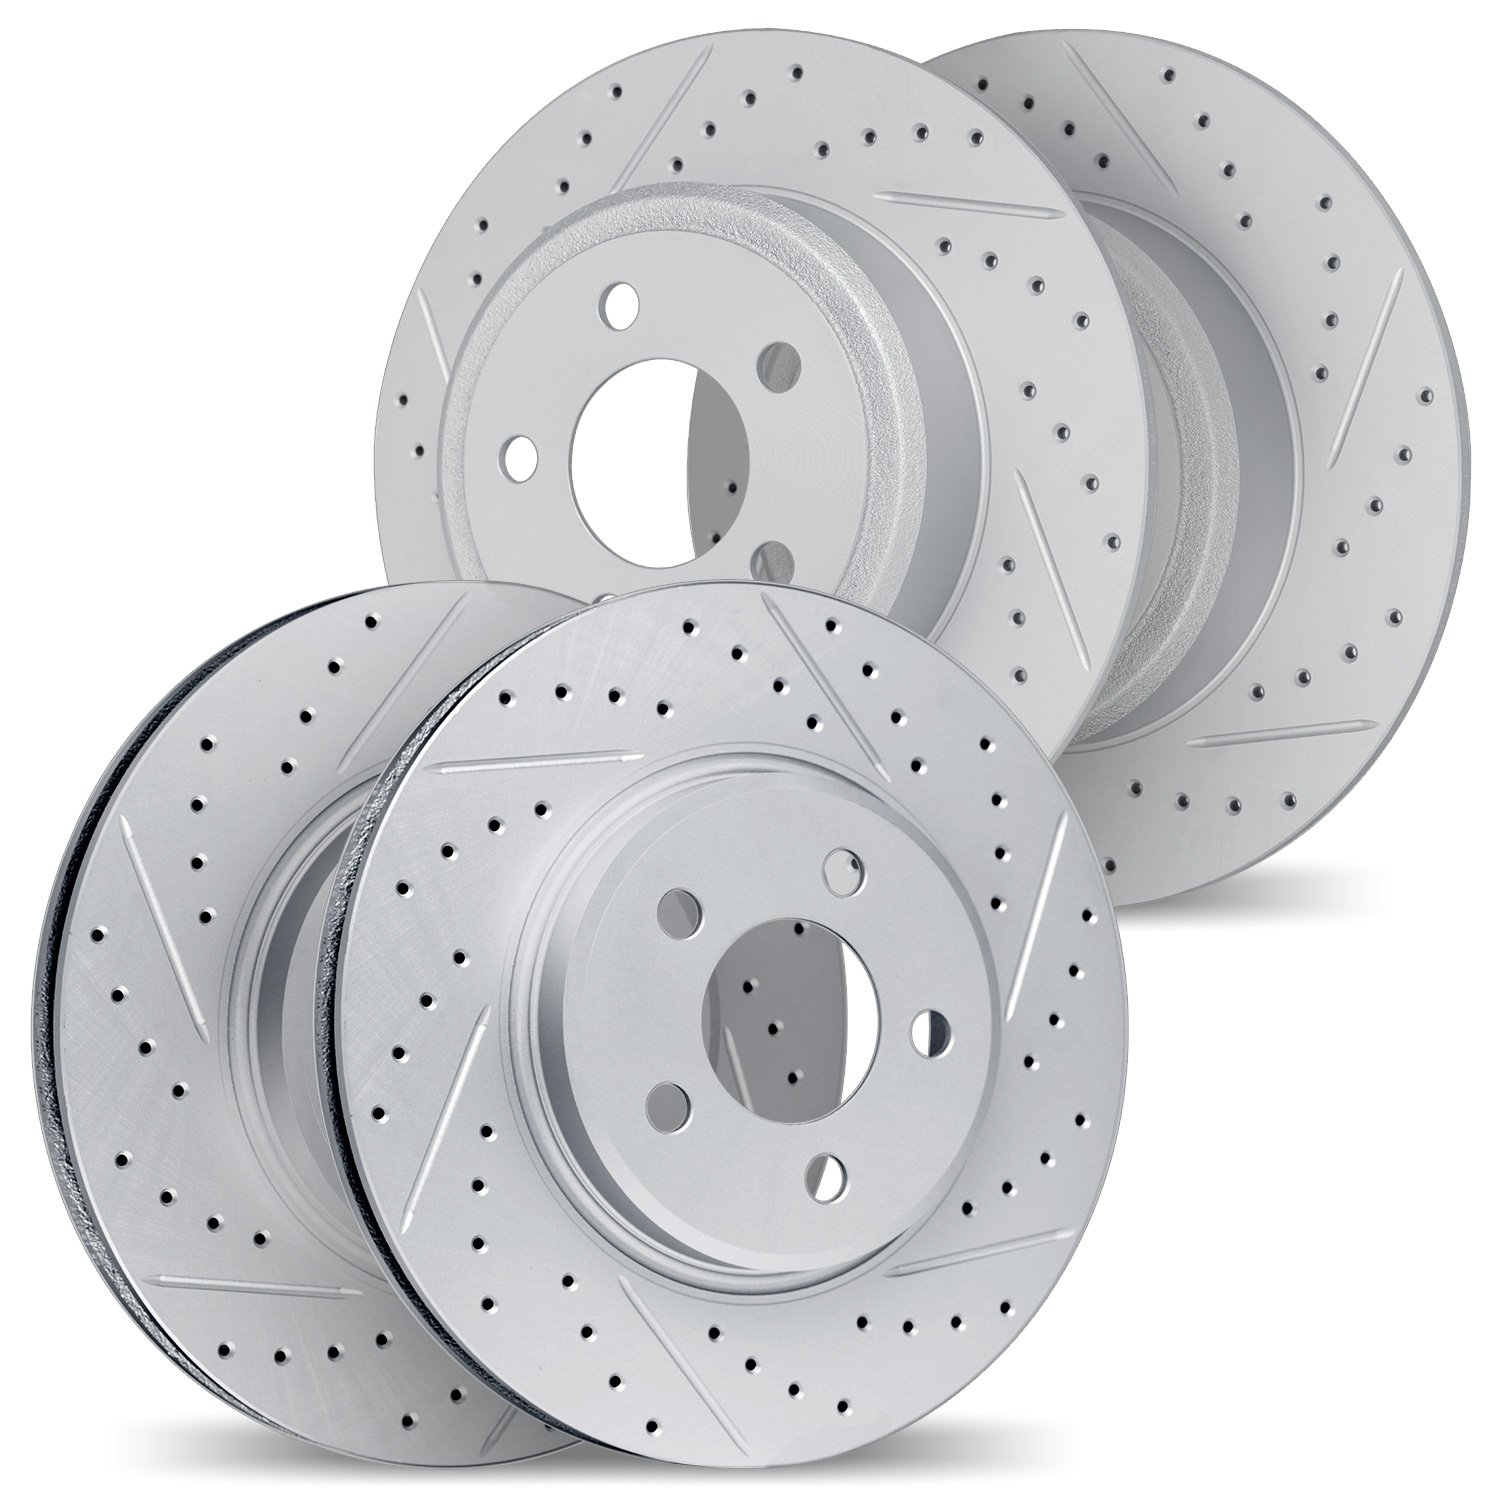 2004-73021 Geoperformance Drilled/Slotted Brake Rotors, 1999-1999 Audi/Volkswagen, Position: Front and Rear